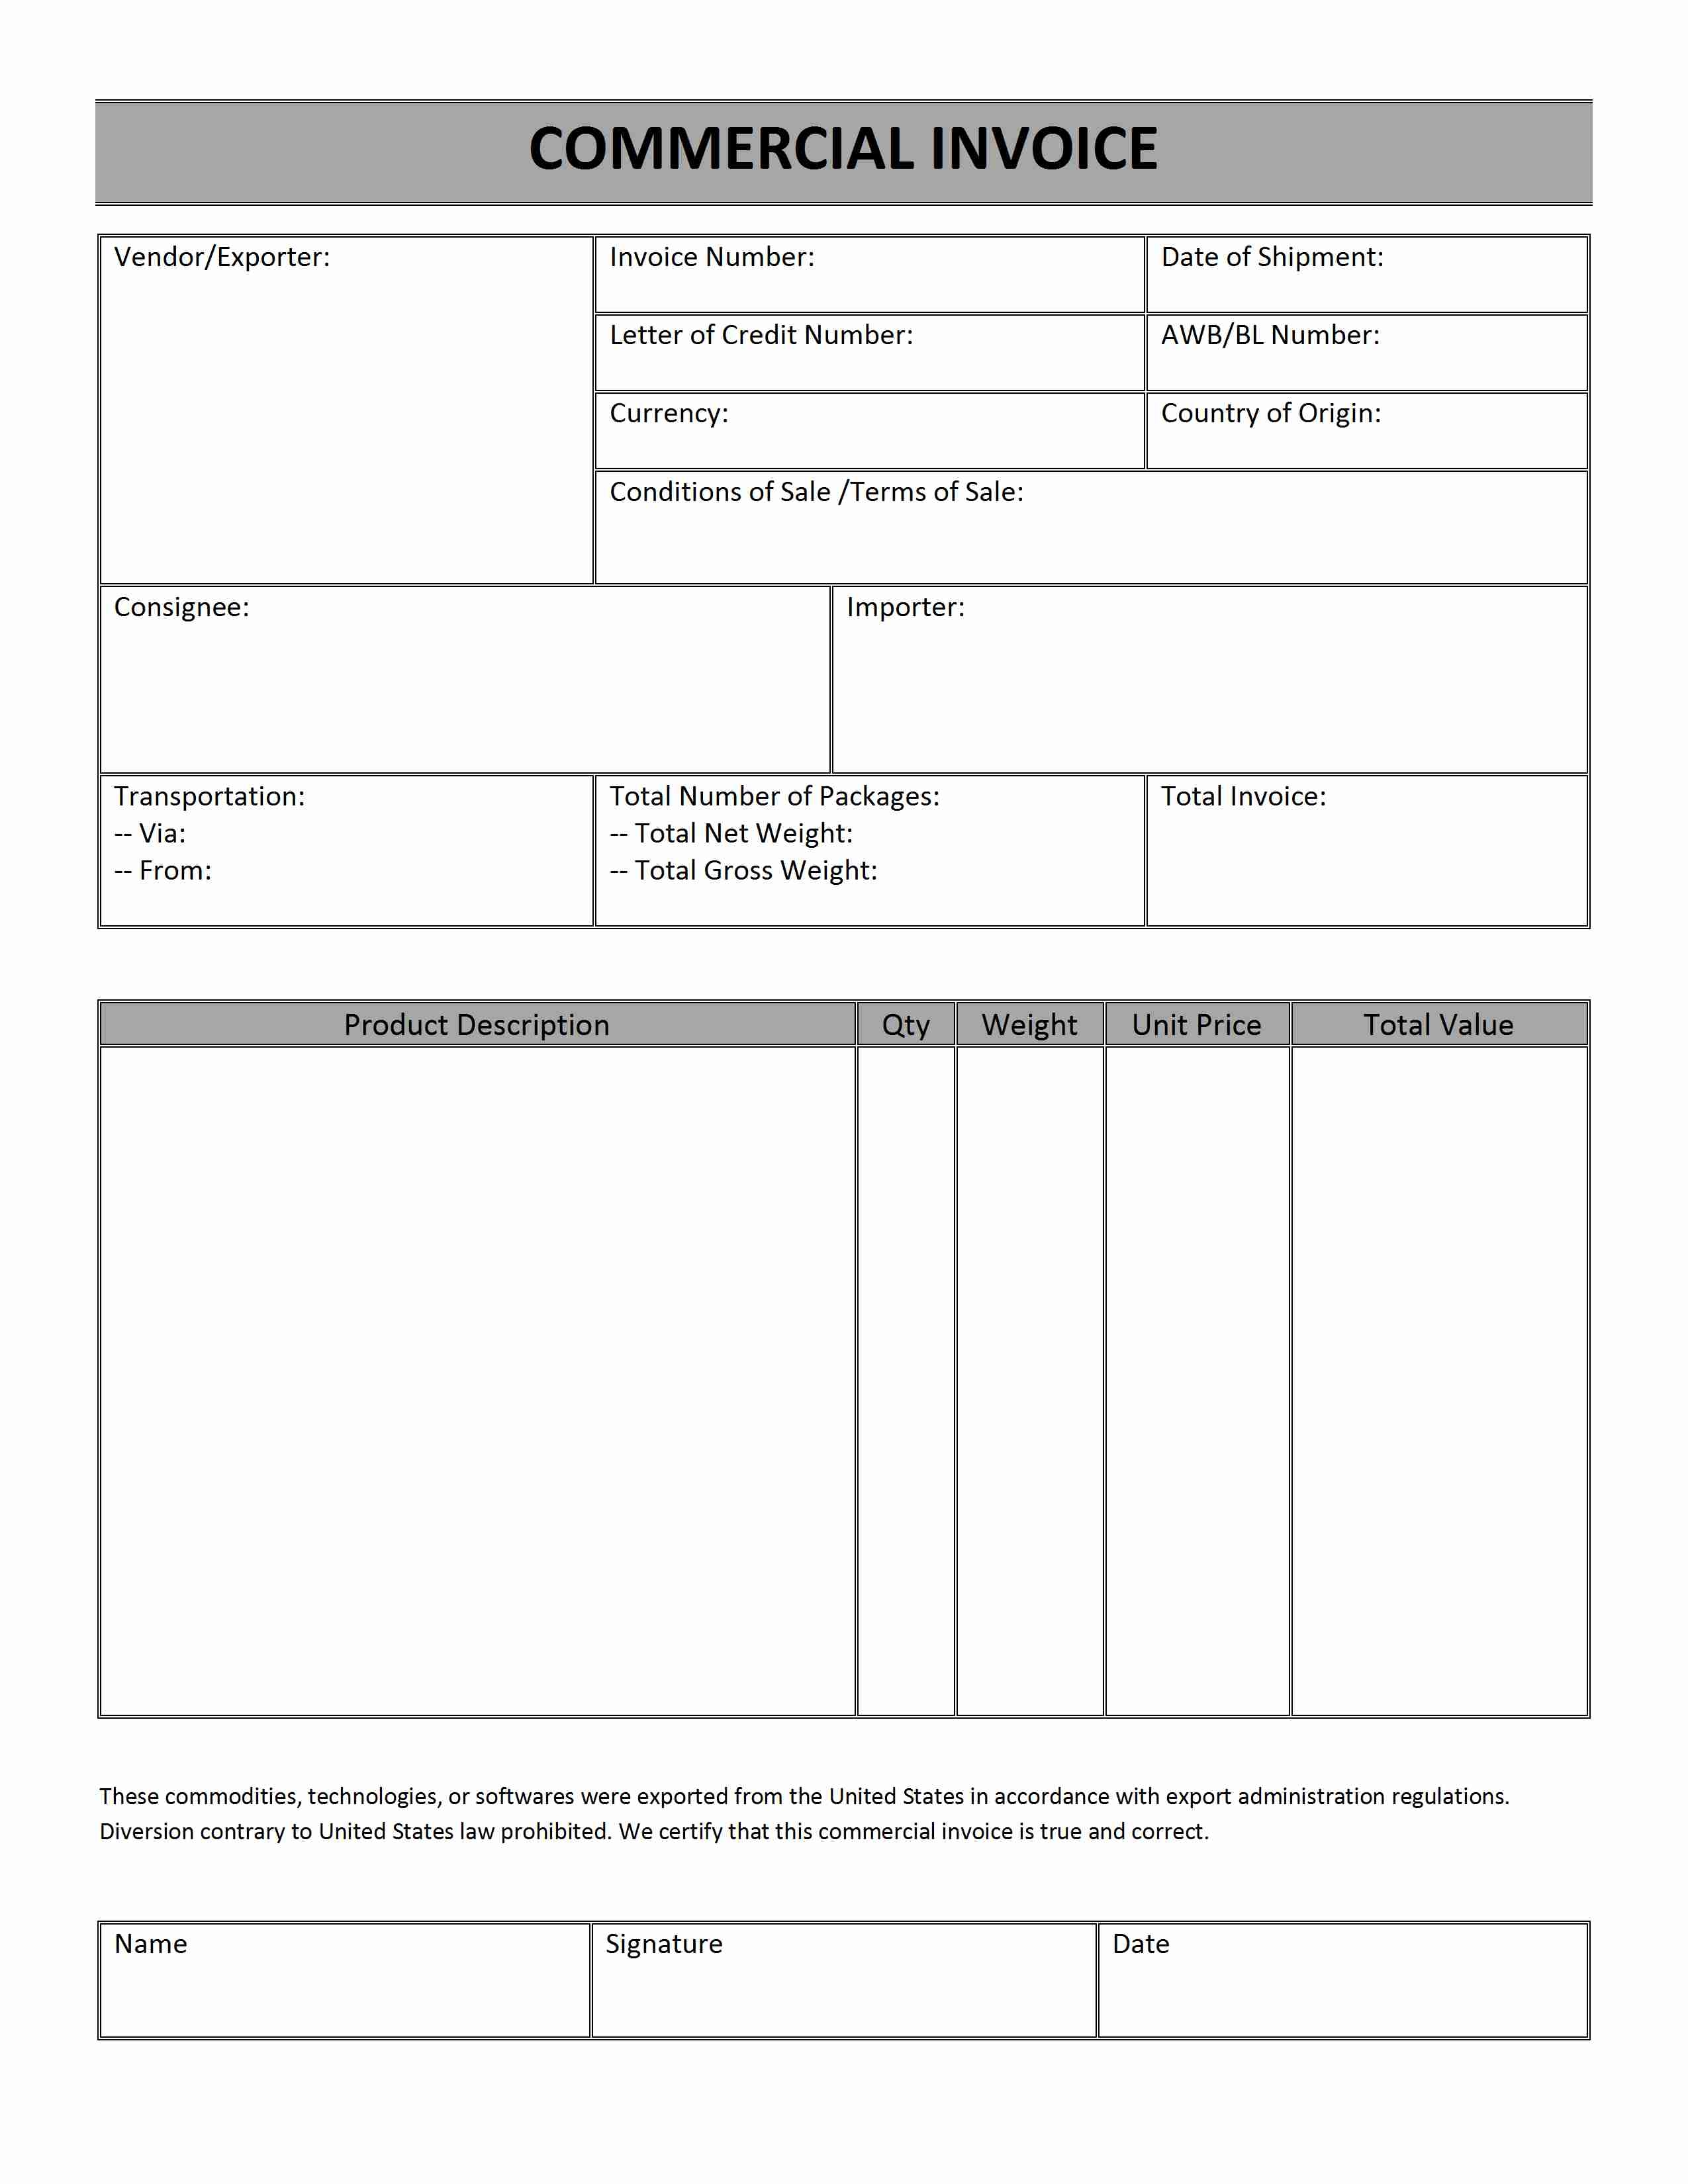 template of basic commercial invoice